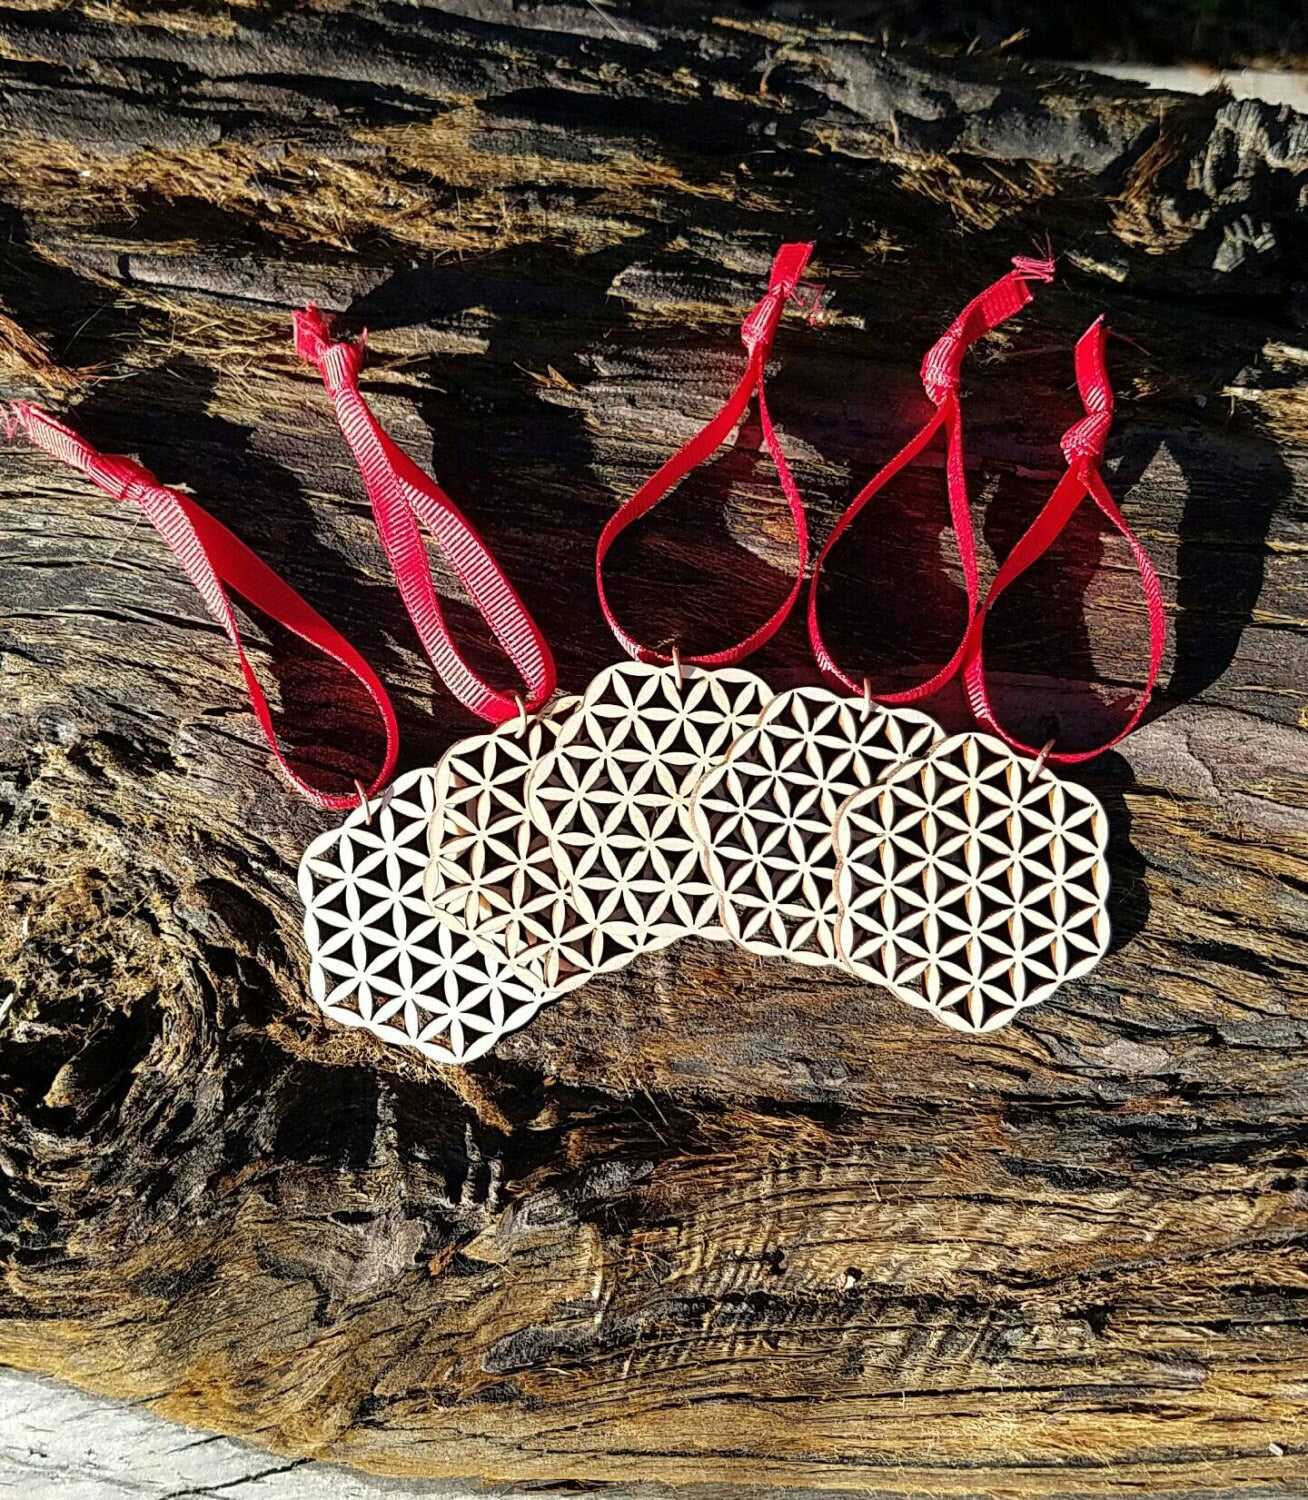 Set of 5 Flower of Life Holiday Ornaments in Reclaimed Wood - Sacred Geometry